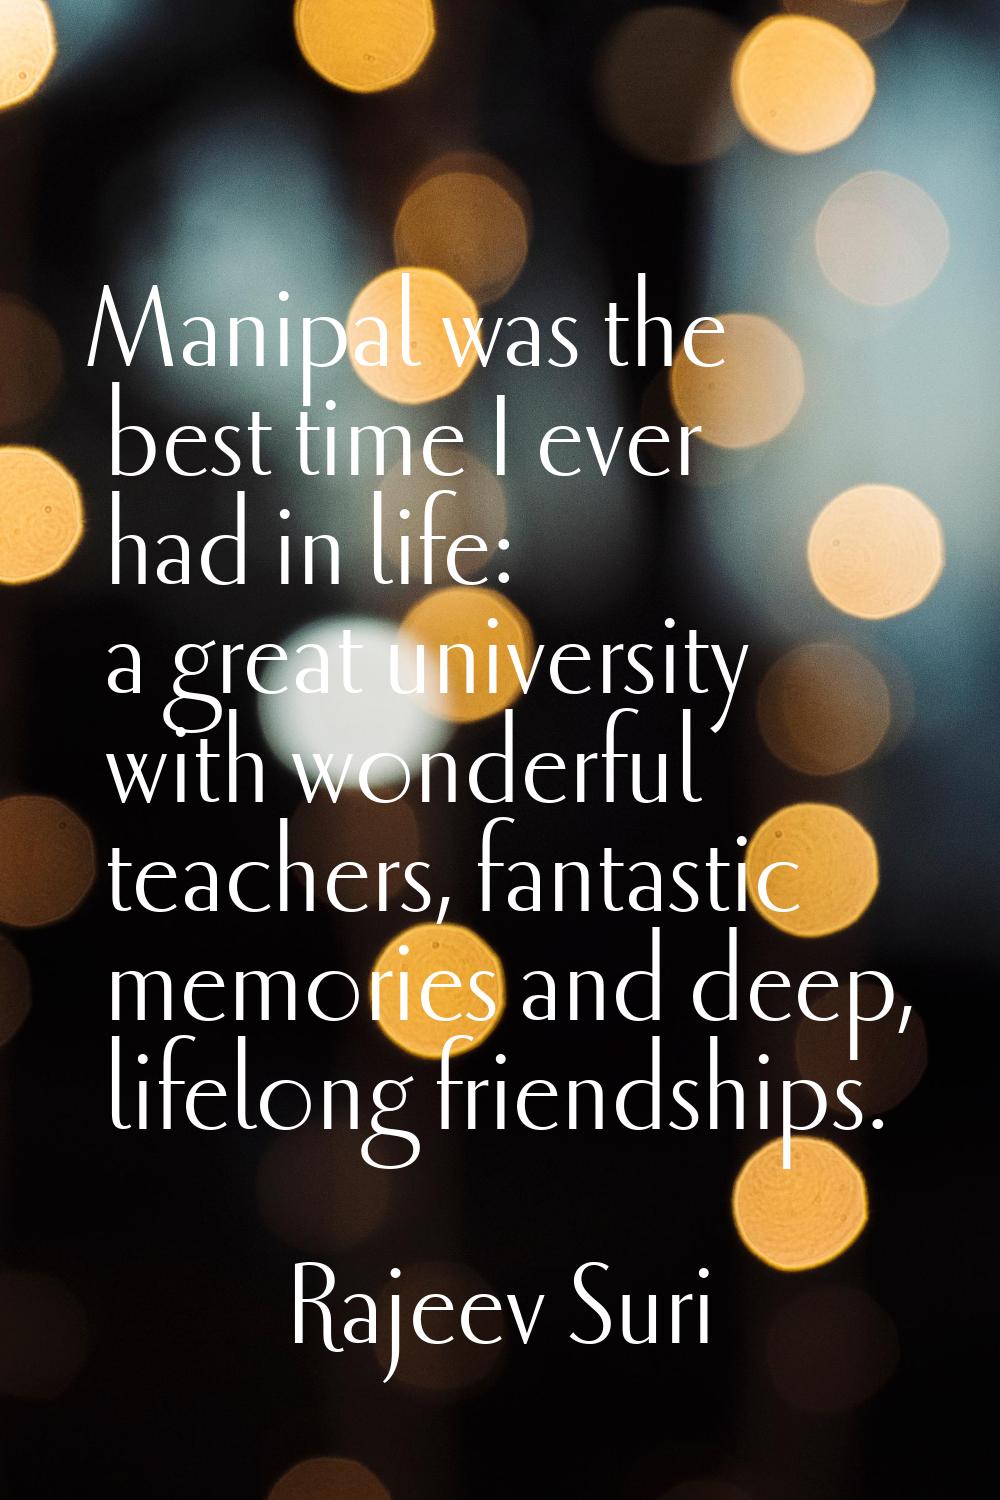 Manipal was the best time I ever had in life: a great university with wonderful teachers, fantastic